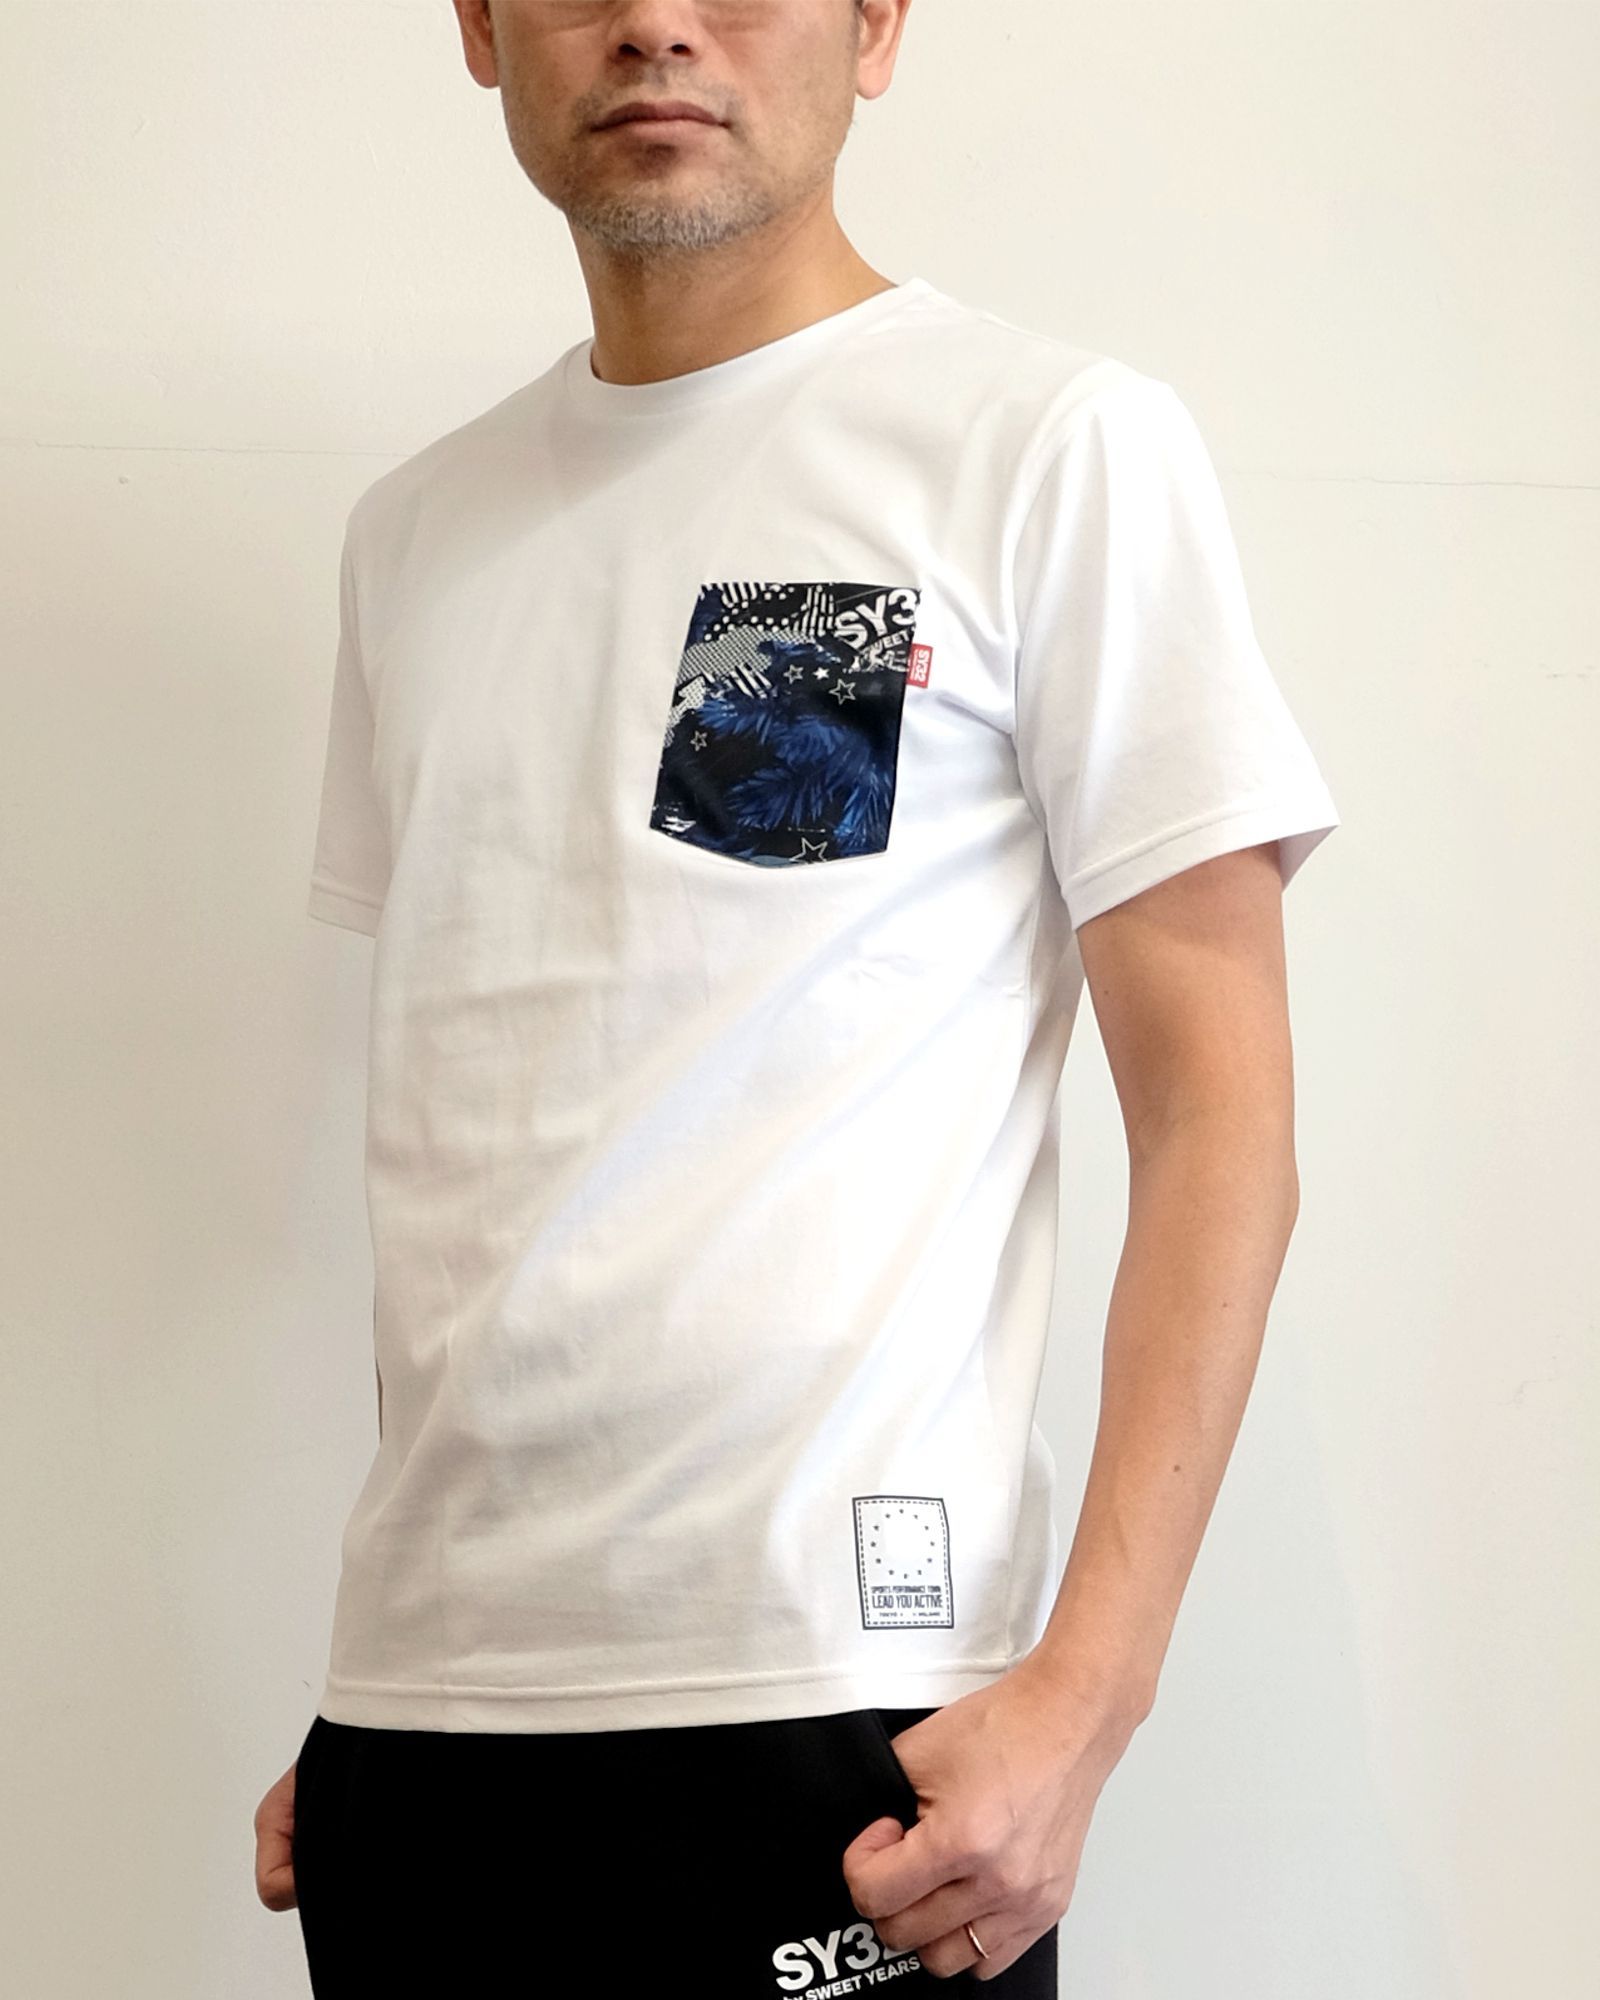 73】【【SY32 by SWEET YEARS】】EXCHANGE POCKET TEE | www